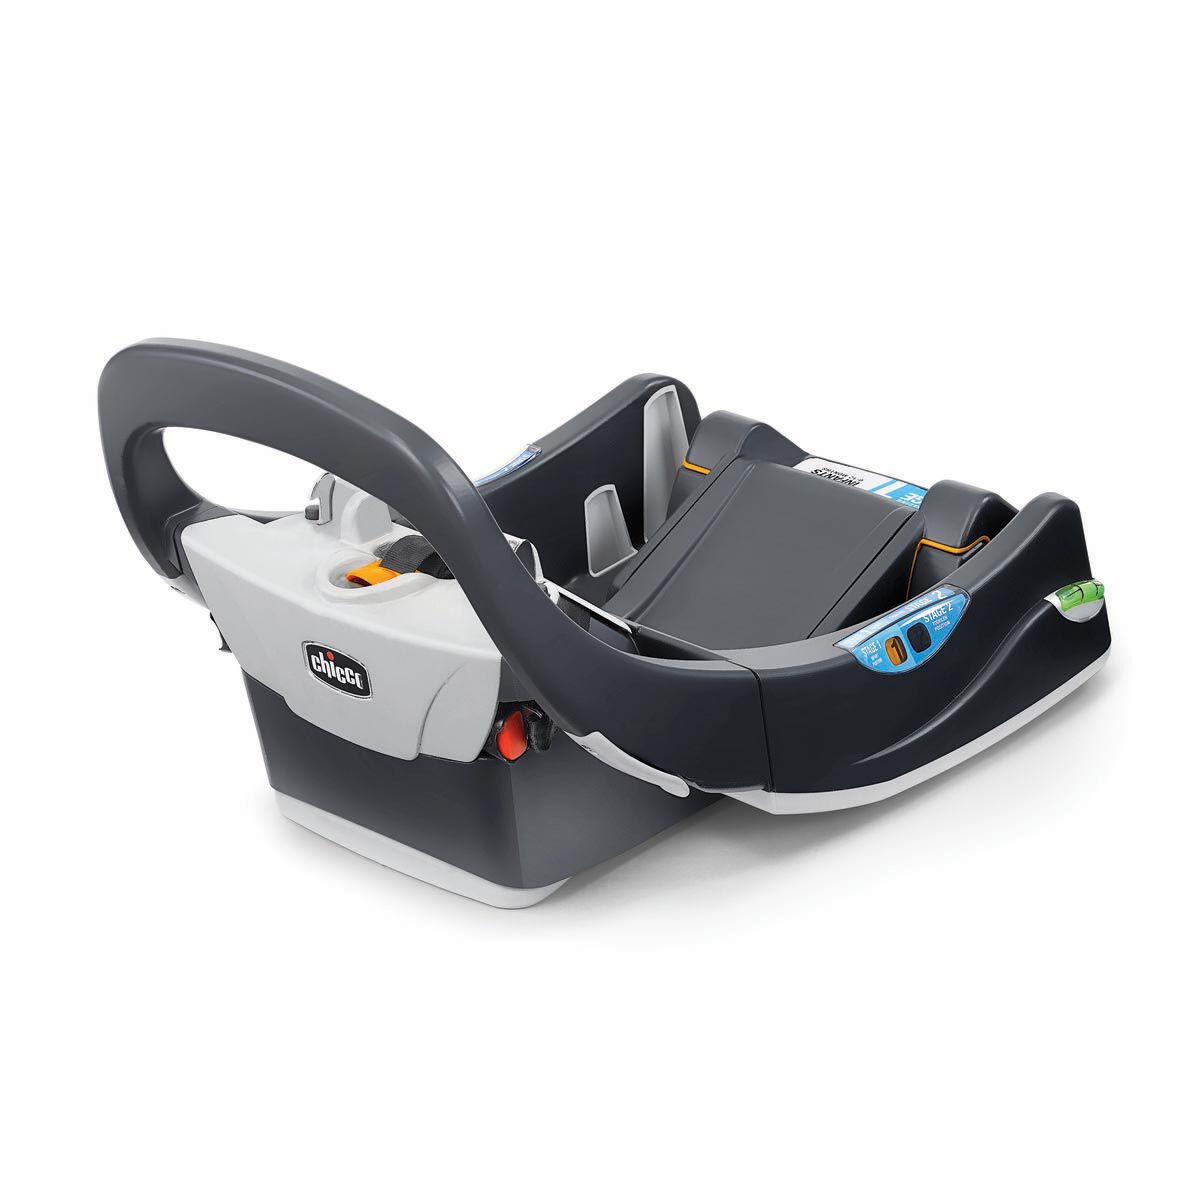 chicco fit 2 compatible stroller